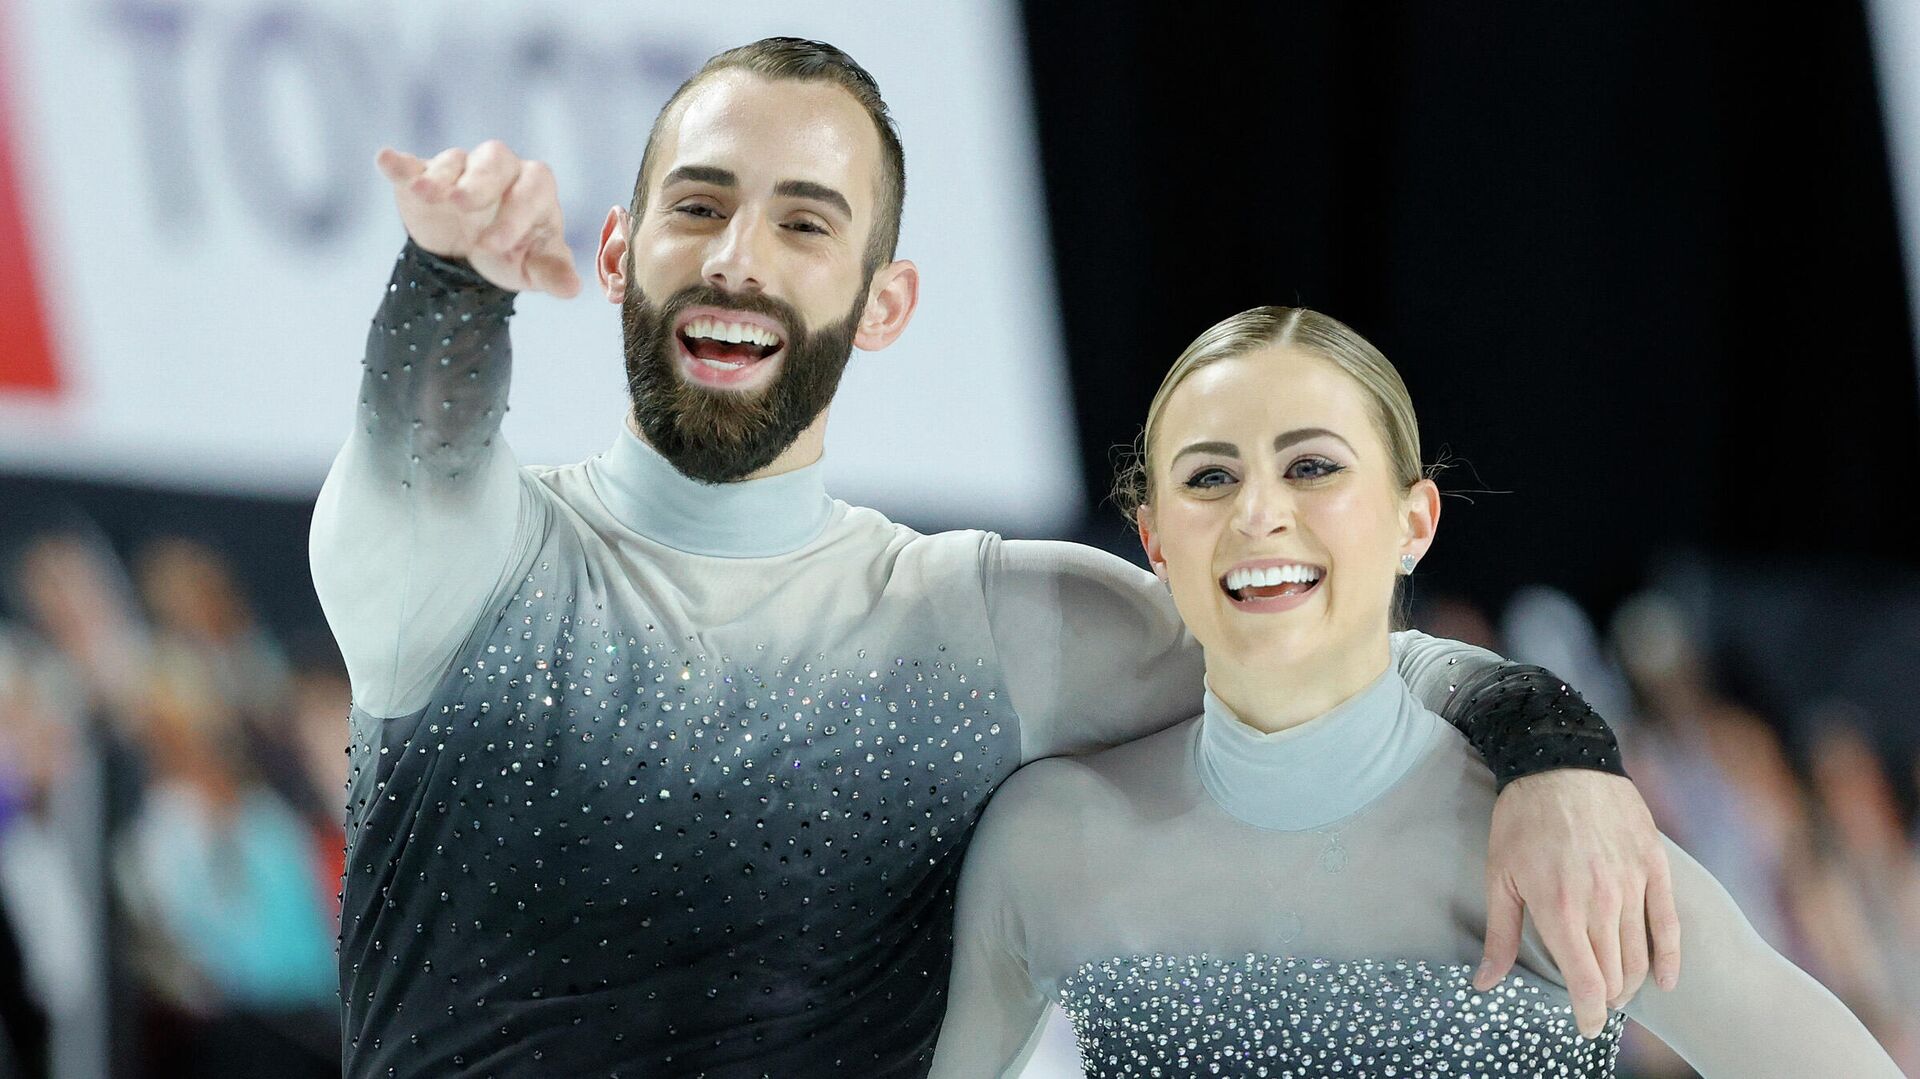 LAS VEGAS, NEVADA - JANUARY 16: Ashley Cain-Gribble and Timothy LeDuc react after competing in the pairs free skate program during the U.S. Figure Skating Championships at the Orleans Arena on January 16, 2021 in Las Vegas, Nevada.   Tim Nwachukwu/Getty Images/AFP (Photo by Tim Nwachukwu / GETTY IMAGES NORTH AMERICA / Getty Images via AFP) - РИА Новости, 1920, 09.01.2022